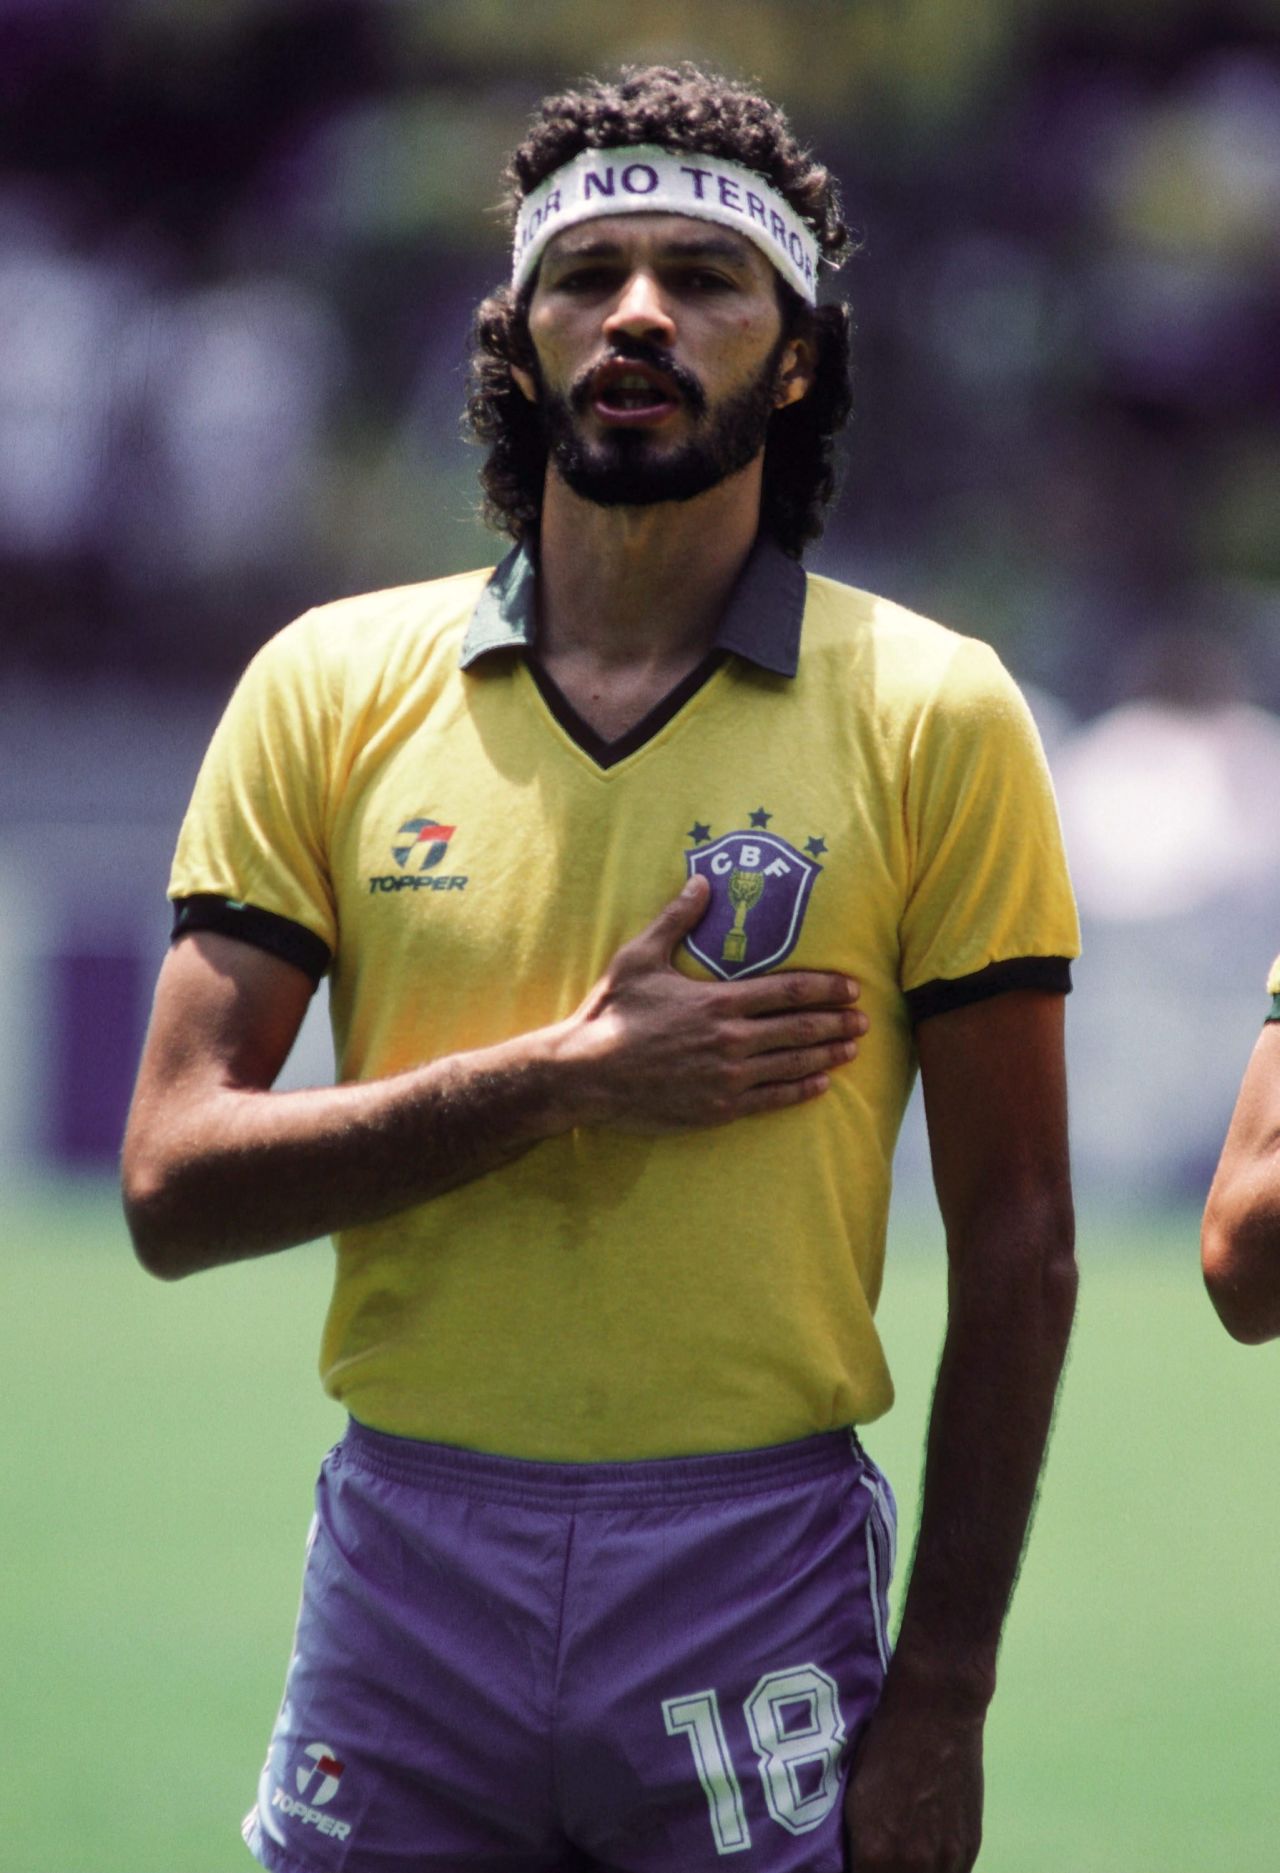 <strong>Brazil's 1982 World Cup team: </strong>Socrates played 60 times for Brazil and captained his country in Spain during the 82 tournament. The Corinthians star was also a medical doctor, earning him the nickname "Dr. Socrates." He was known for being a heavy smoker during his playing day and died at the age 57 in 2011. "Football as we know it died that day," he would later say of Brazil's loss to Italy. 